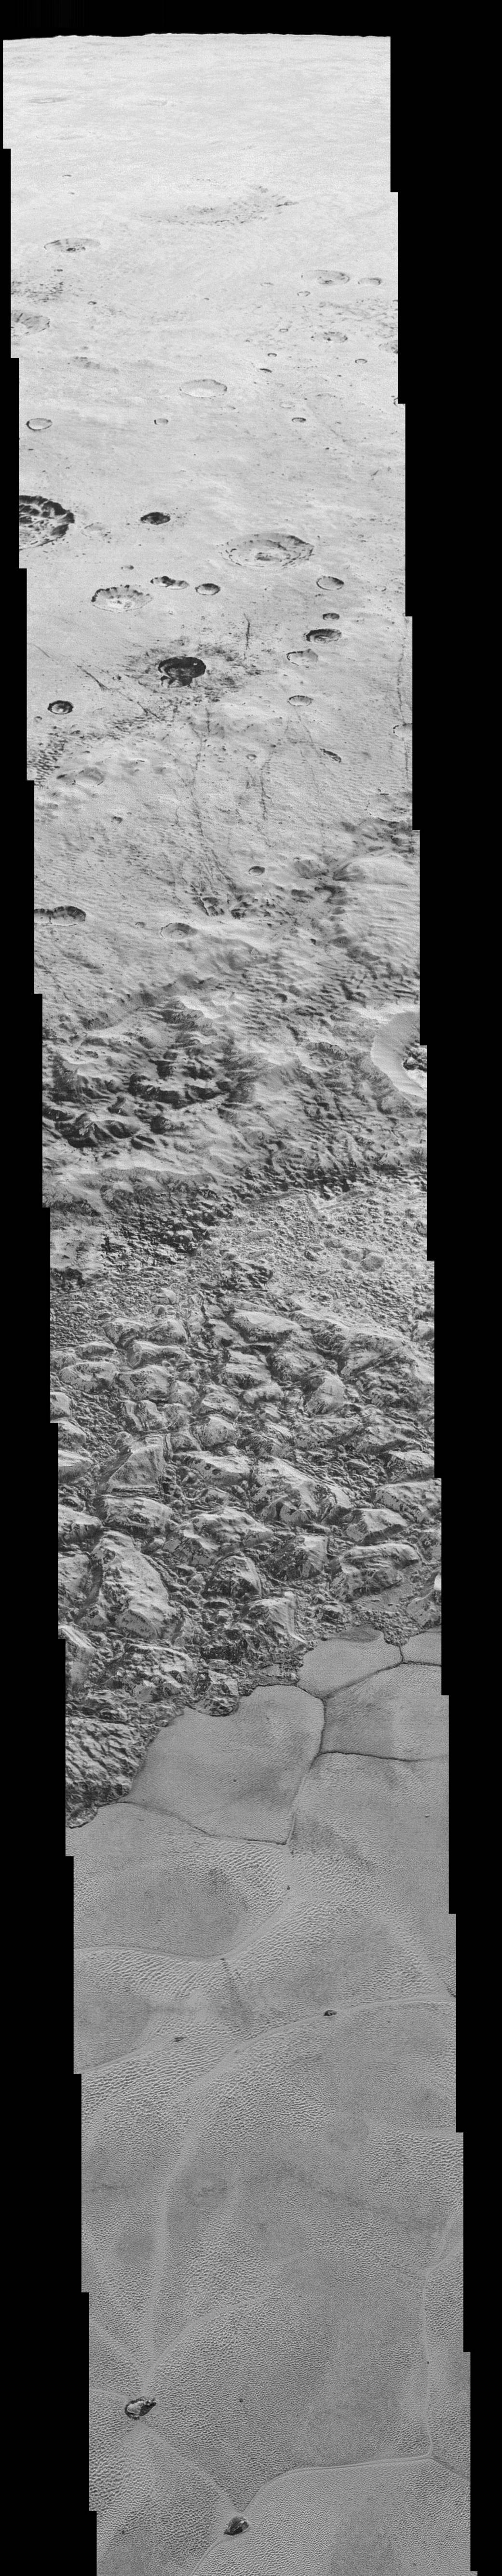 This mosaic is composed of the sharpest views of Pluto that NASA’s New Horizons spacecraft obtained during its flyby on July 14, 2015. The pictures are part of a sequence taken near New Horizons’ closest approach to Pluto, with resolutions of about 250-280 feet (77-85 meters) per pixel – revealing features smaller than half a city block on Pluto’s diverse surface. The images include a wide variety of cratered, mountainous and glacial terrains – giving scientists and the public alike a super-high resolution window to Pluto’s geology. The images form a strip 50 miles (80 kilometers) wide trending from Pluto’s jagged horizon about 500 miles (800 kilometers) northwest of the informally named Sputnik Planum, across the al-Idrisi mountains, onto the shoreline of Sputnik Planum and across its icy plains. They were made with the telescopic Long Range Reconnaissance Imager (LORRI) aboard New Horizons, over a timespan of about a minute centered on 11:36 UT on July 14 – just about 15 minutes before New Horizons’ closest approach to Pluto –from a range of just 10,000 miles (17,000 kilometers). Credit: NASA/JHUAPL/SwRI